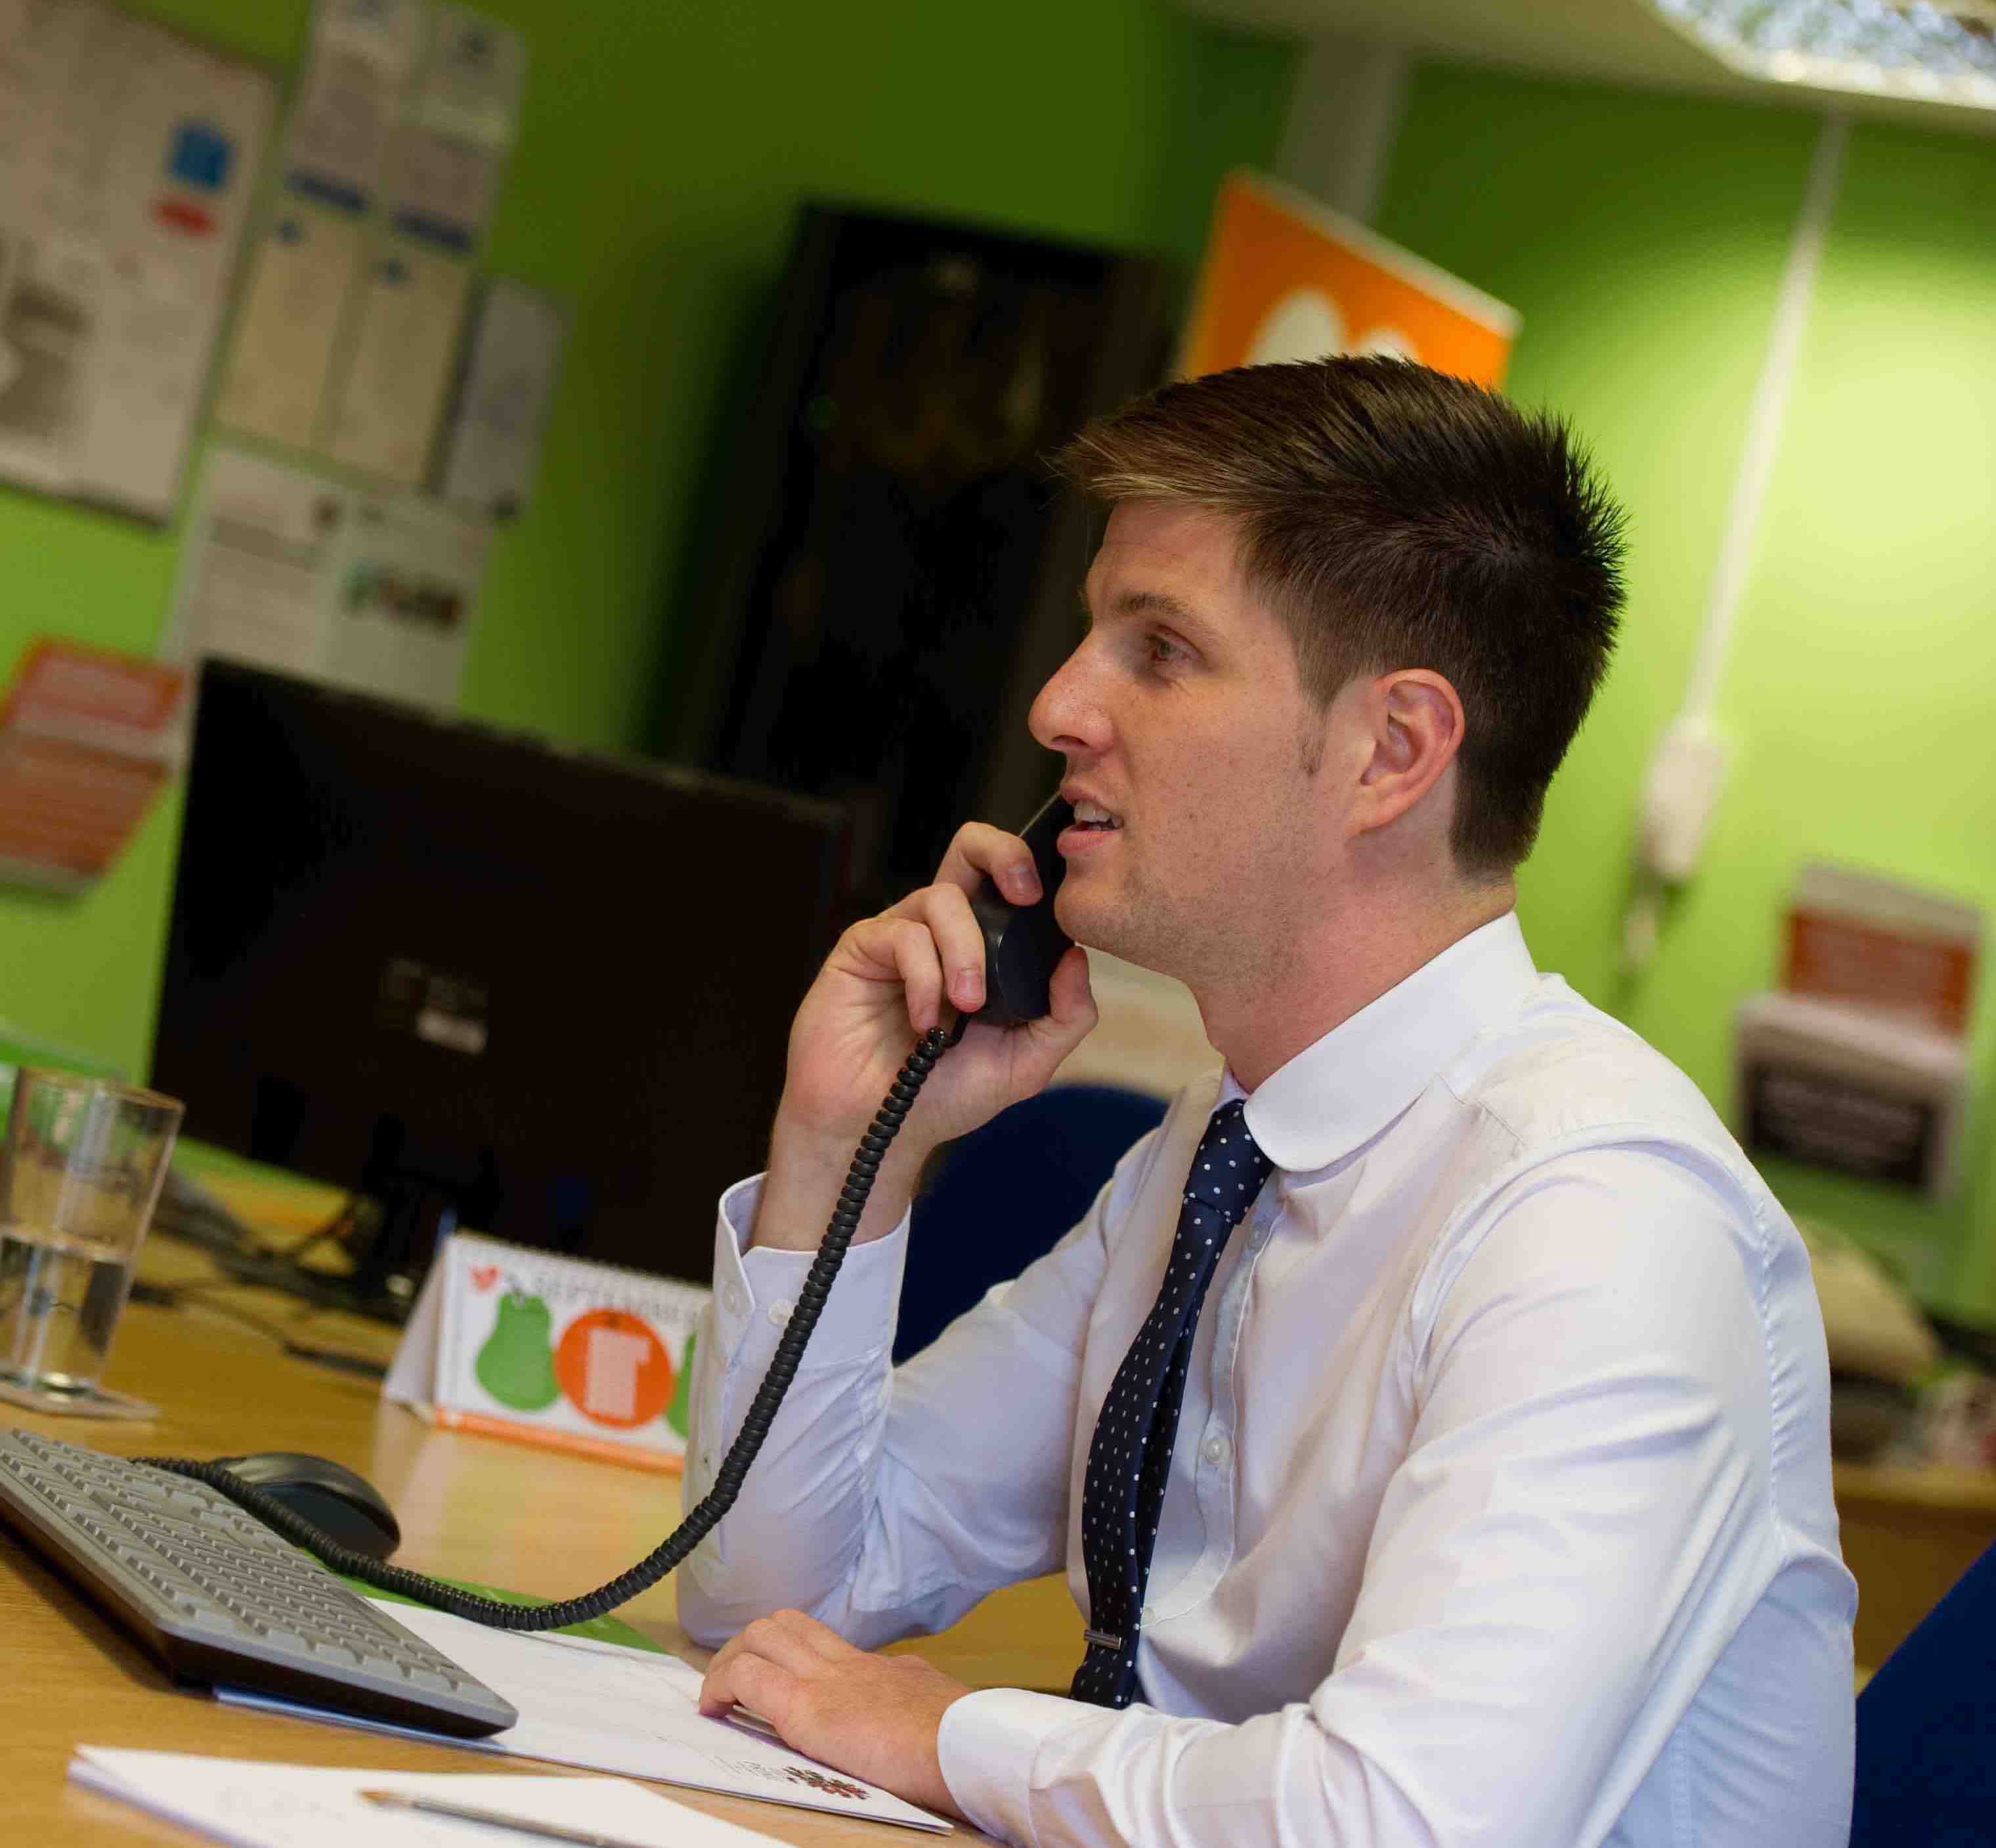 Jack O'Brien, (Director) on the phone wearing shirt and tie in the Prime Appointments office